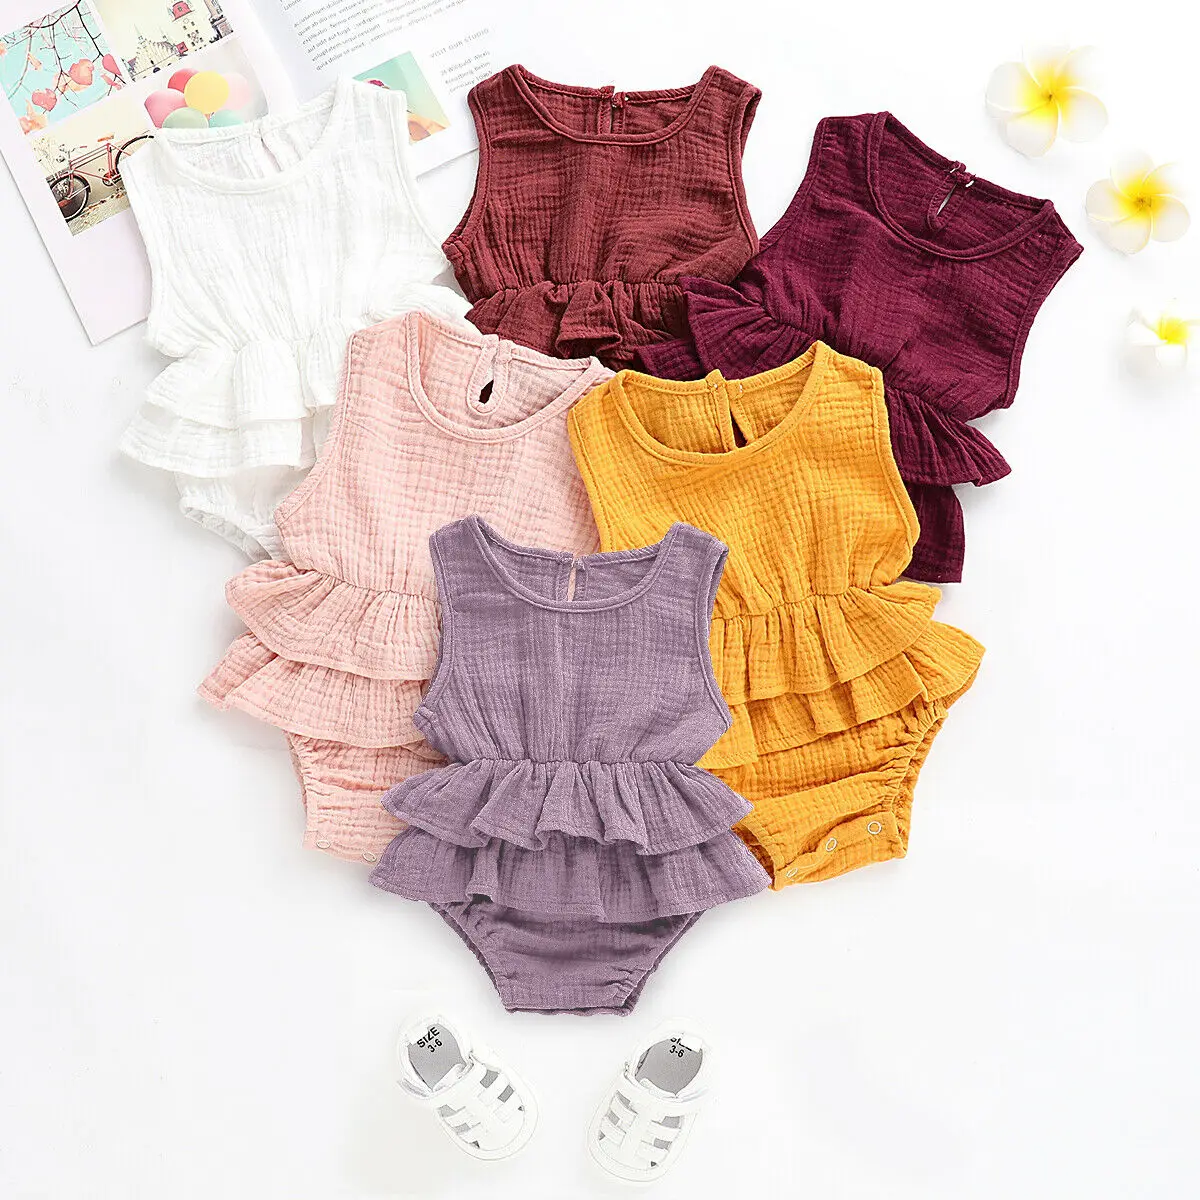 

Newborn Kid Baby Girl Clothes Sleeveless Romper Tutu Dress Sunsuit Home Cotton Linen Blend Solid Outfit Playsuit Clothes 0-2Y